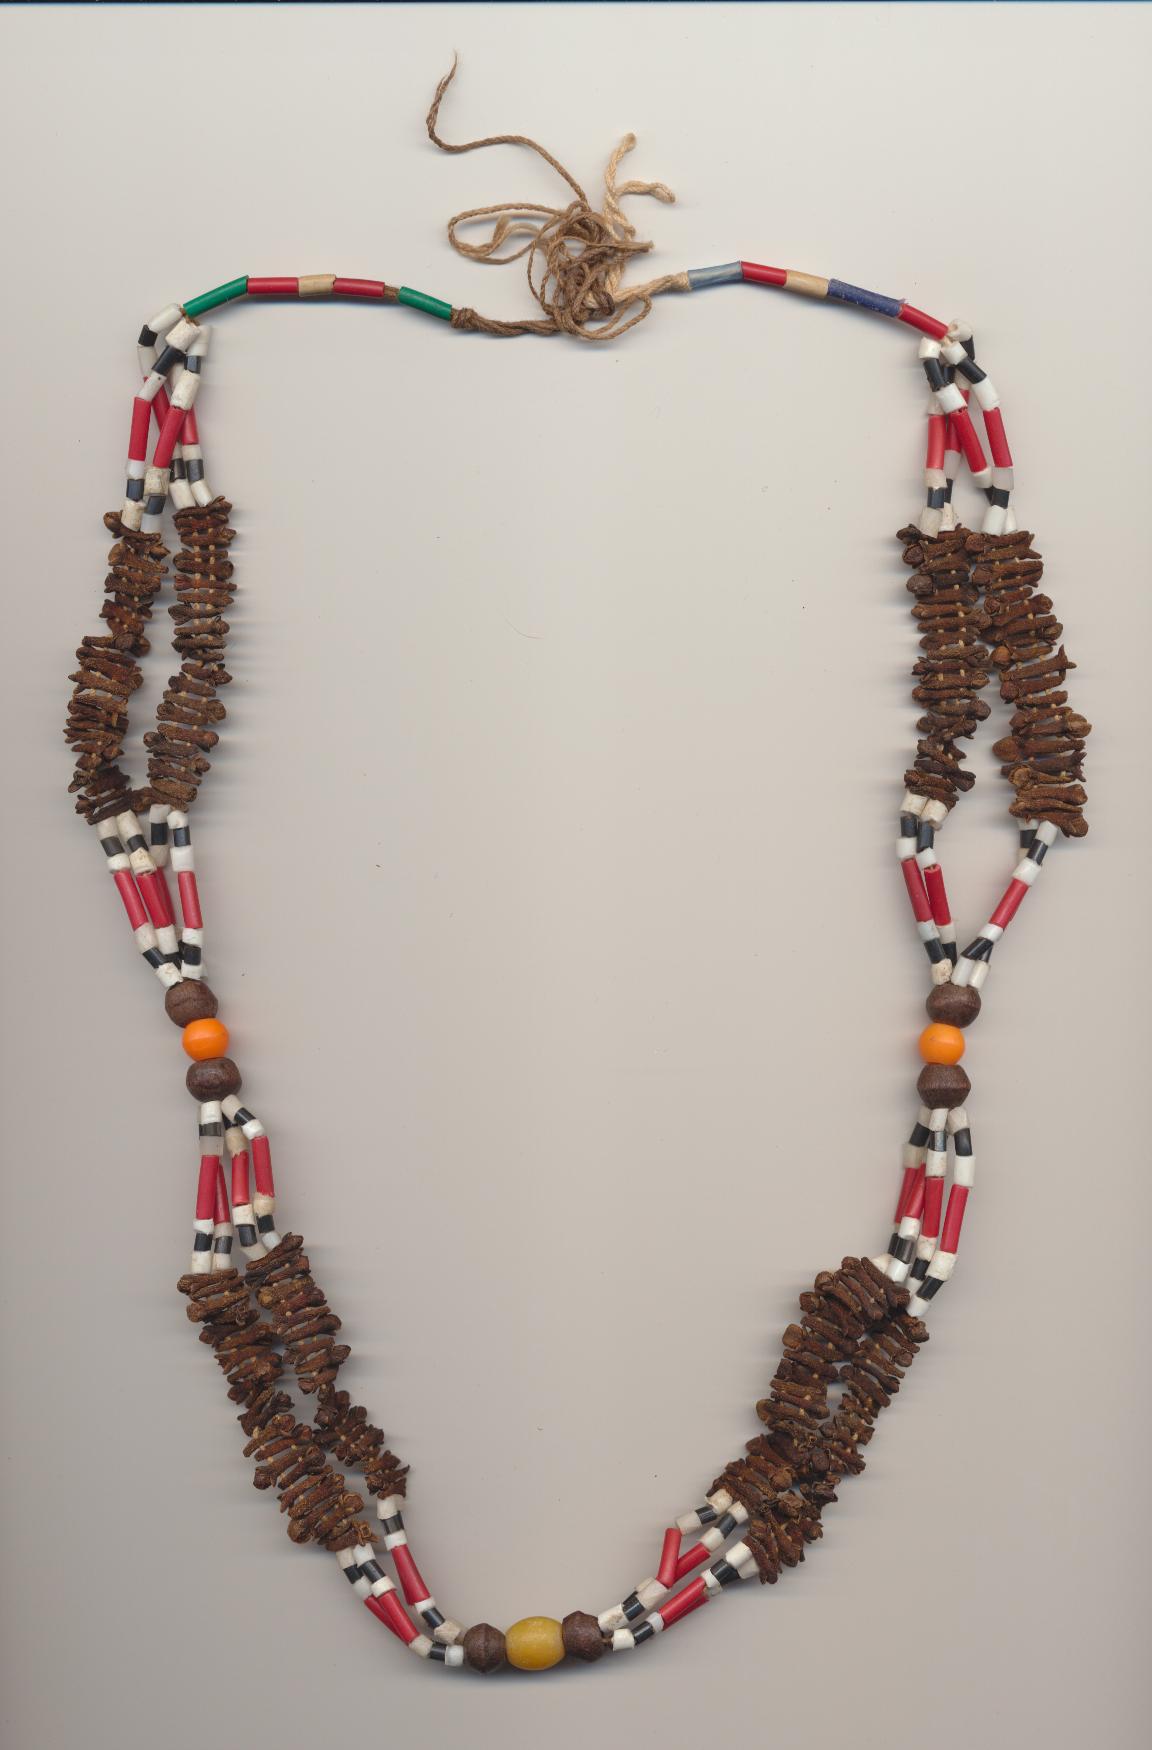 Bedouin necklace from the Negev (Israel), cloves, wooden and plastic beads imitating, among other, coral, amber and camel bone, length 26'' 66cm.